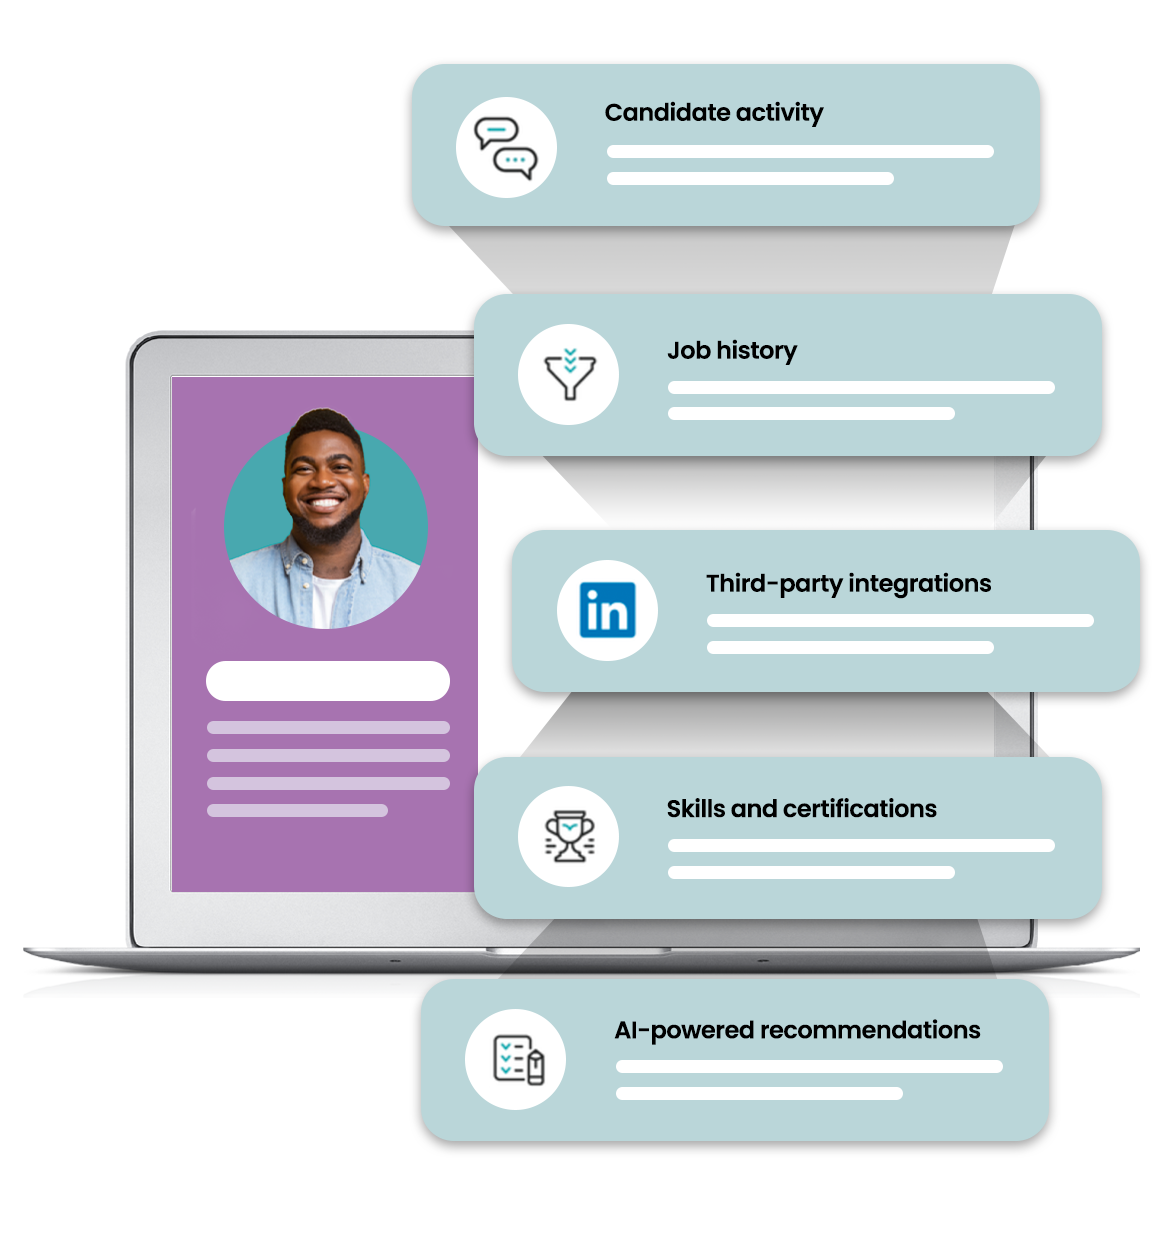 iCIMS dynamic candidate profile gathering data around candidate activity across the entire iCIMS Talent Cloud, job history, LinkedIn, skills and certification, and more